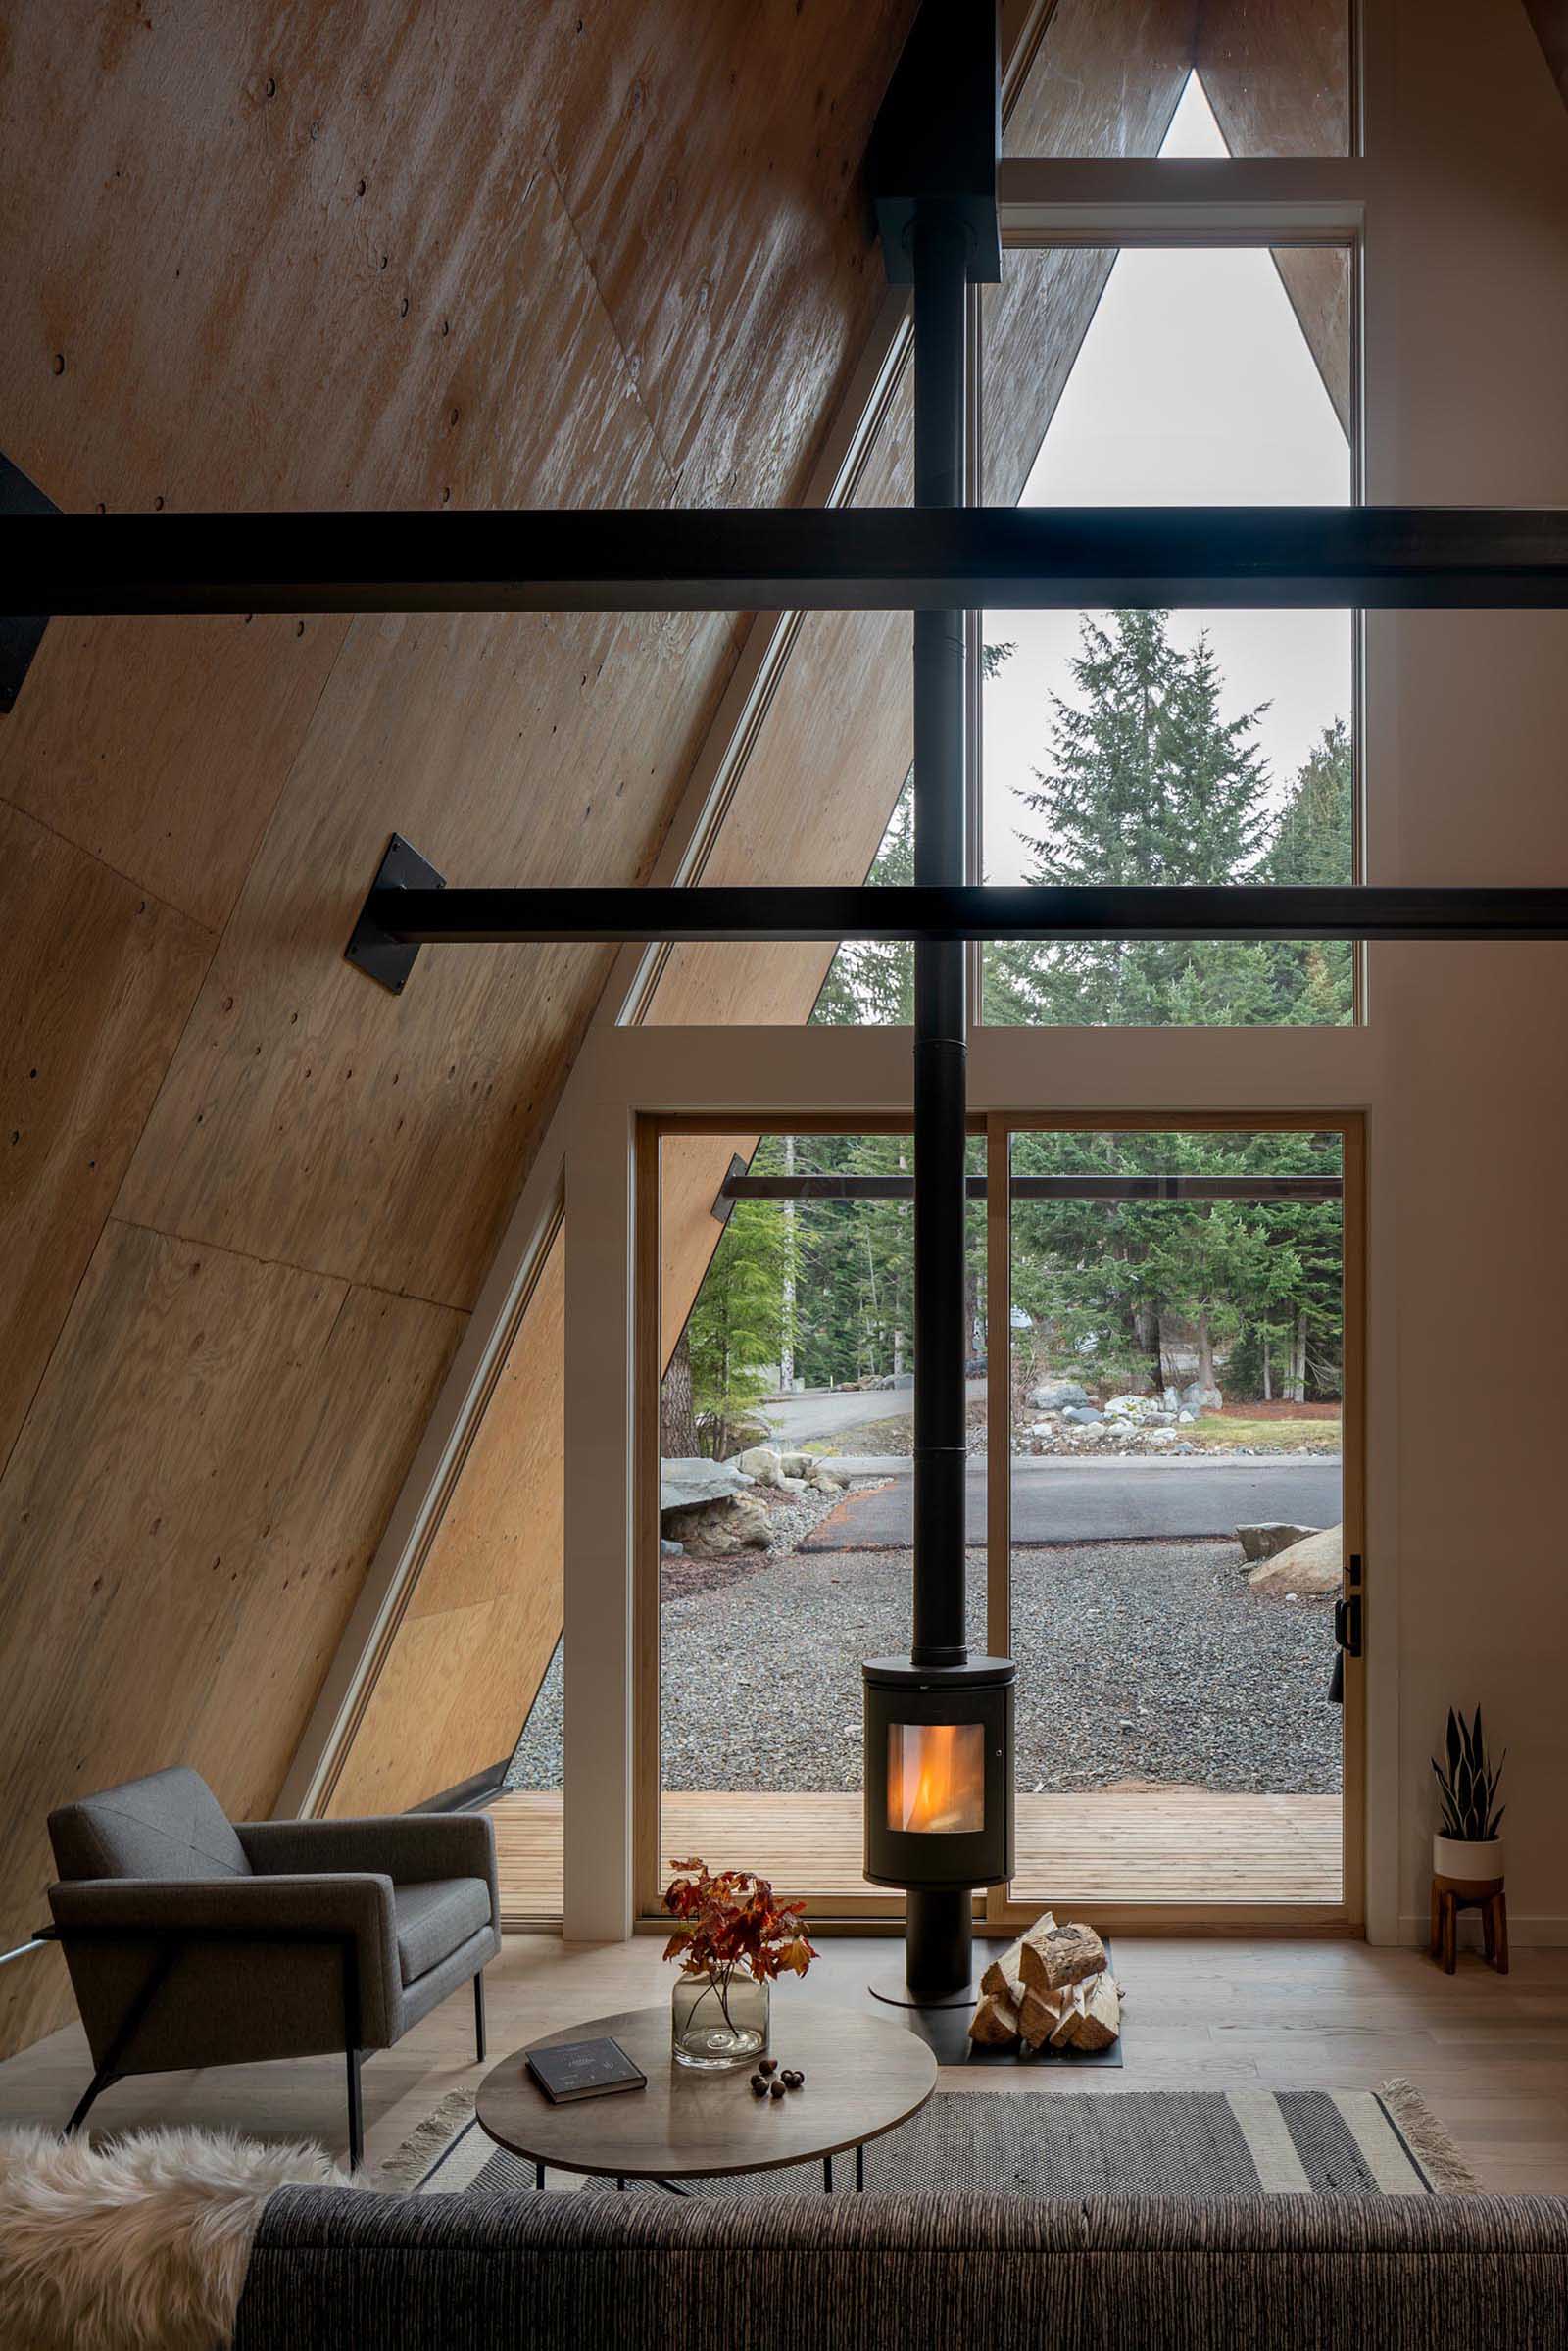 The cozy wood-lined interior of this A-frame cabin includes a fireplace with a black finish that complements the other metal elements. Sliding glass doors open to covered verandahs.